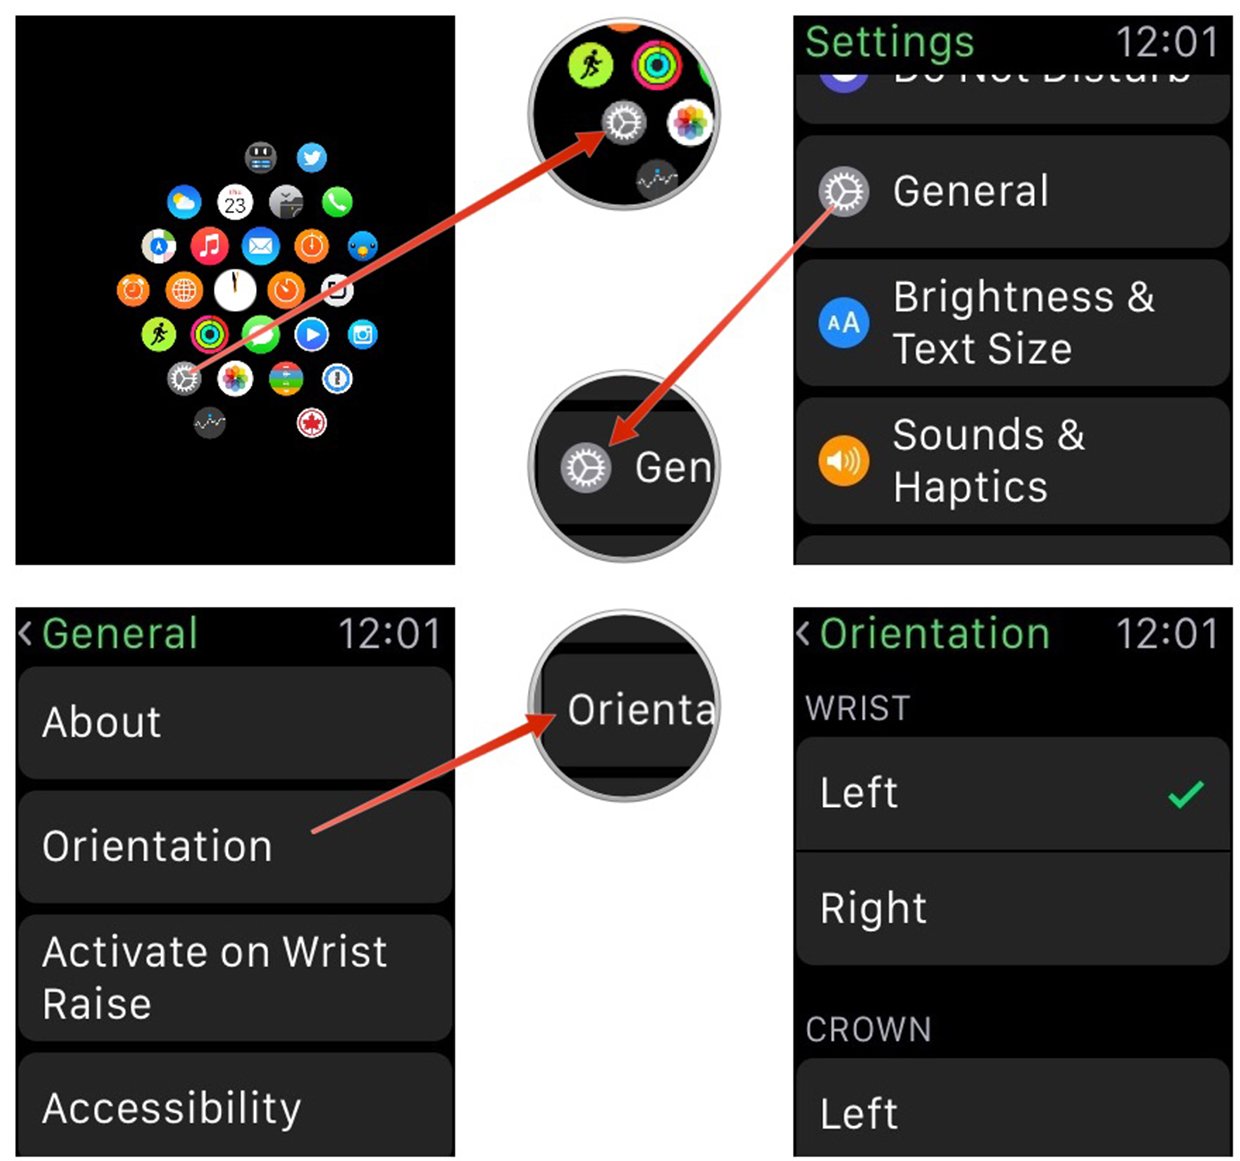 How to set up the Apple Watch for left-handed use